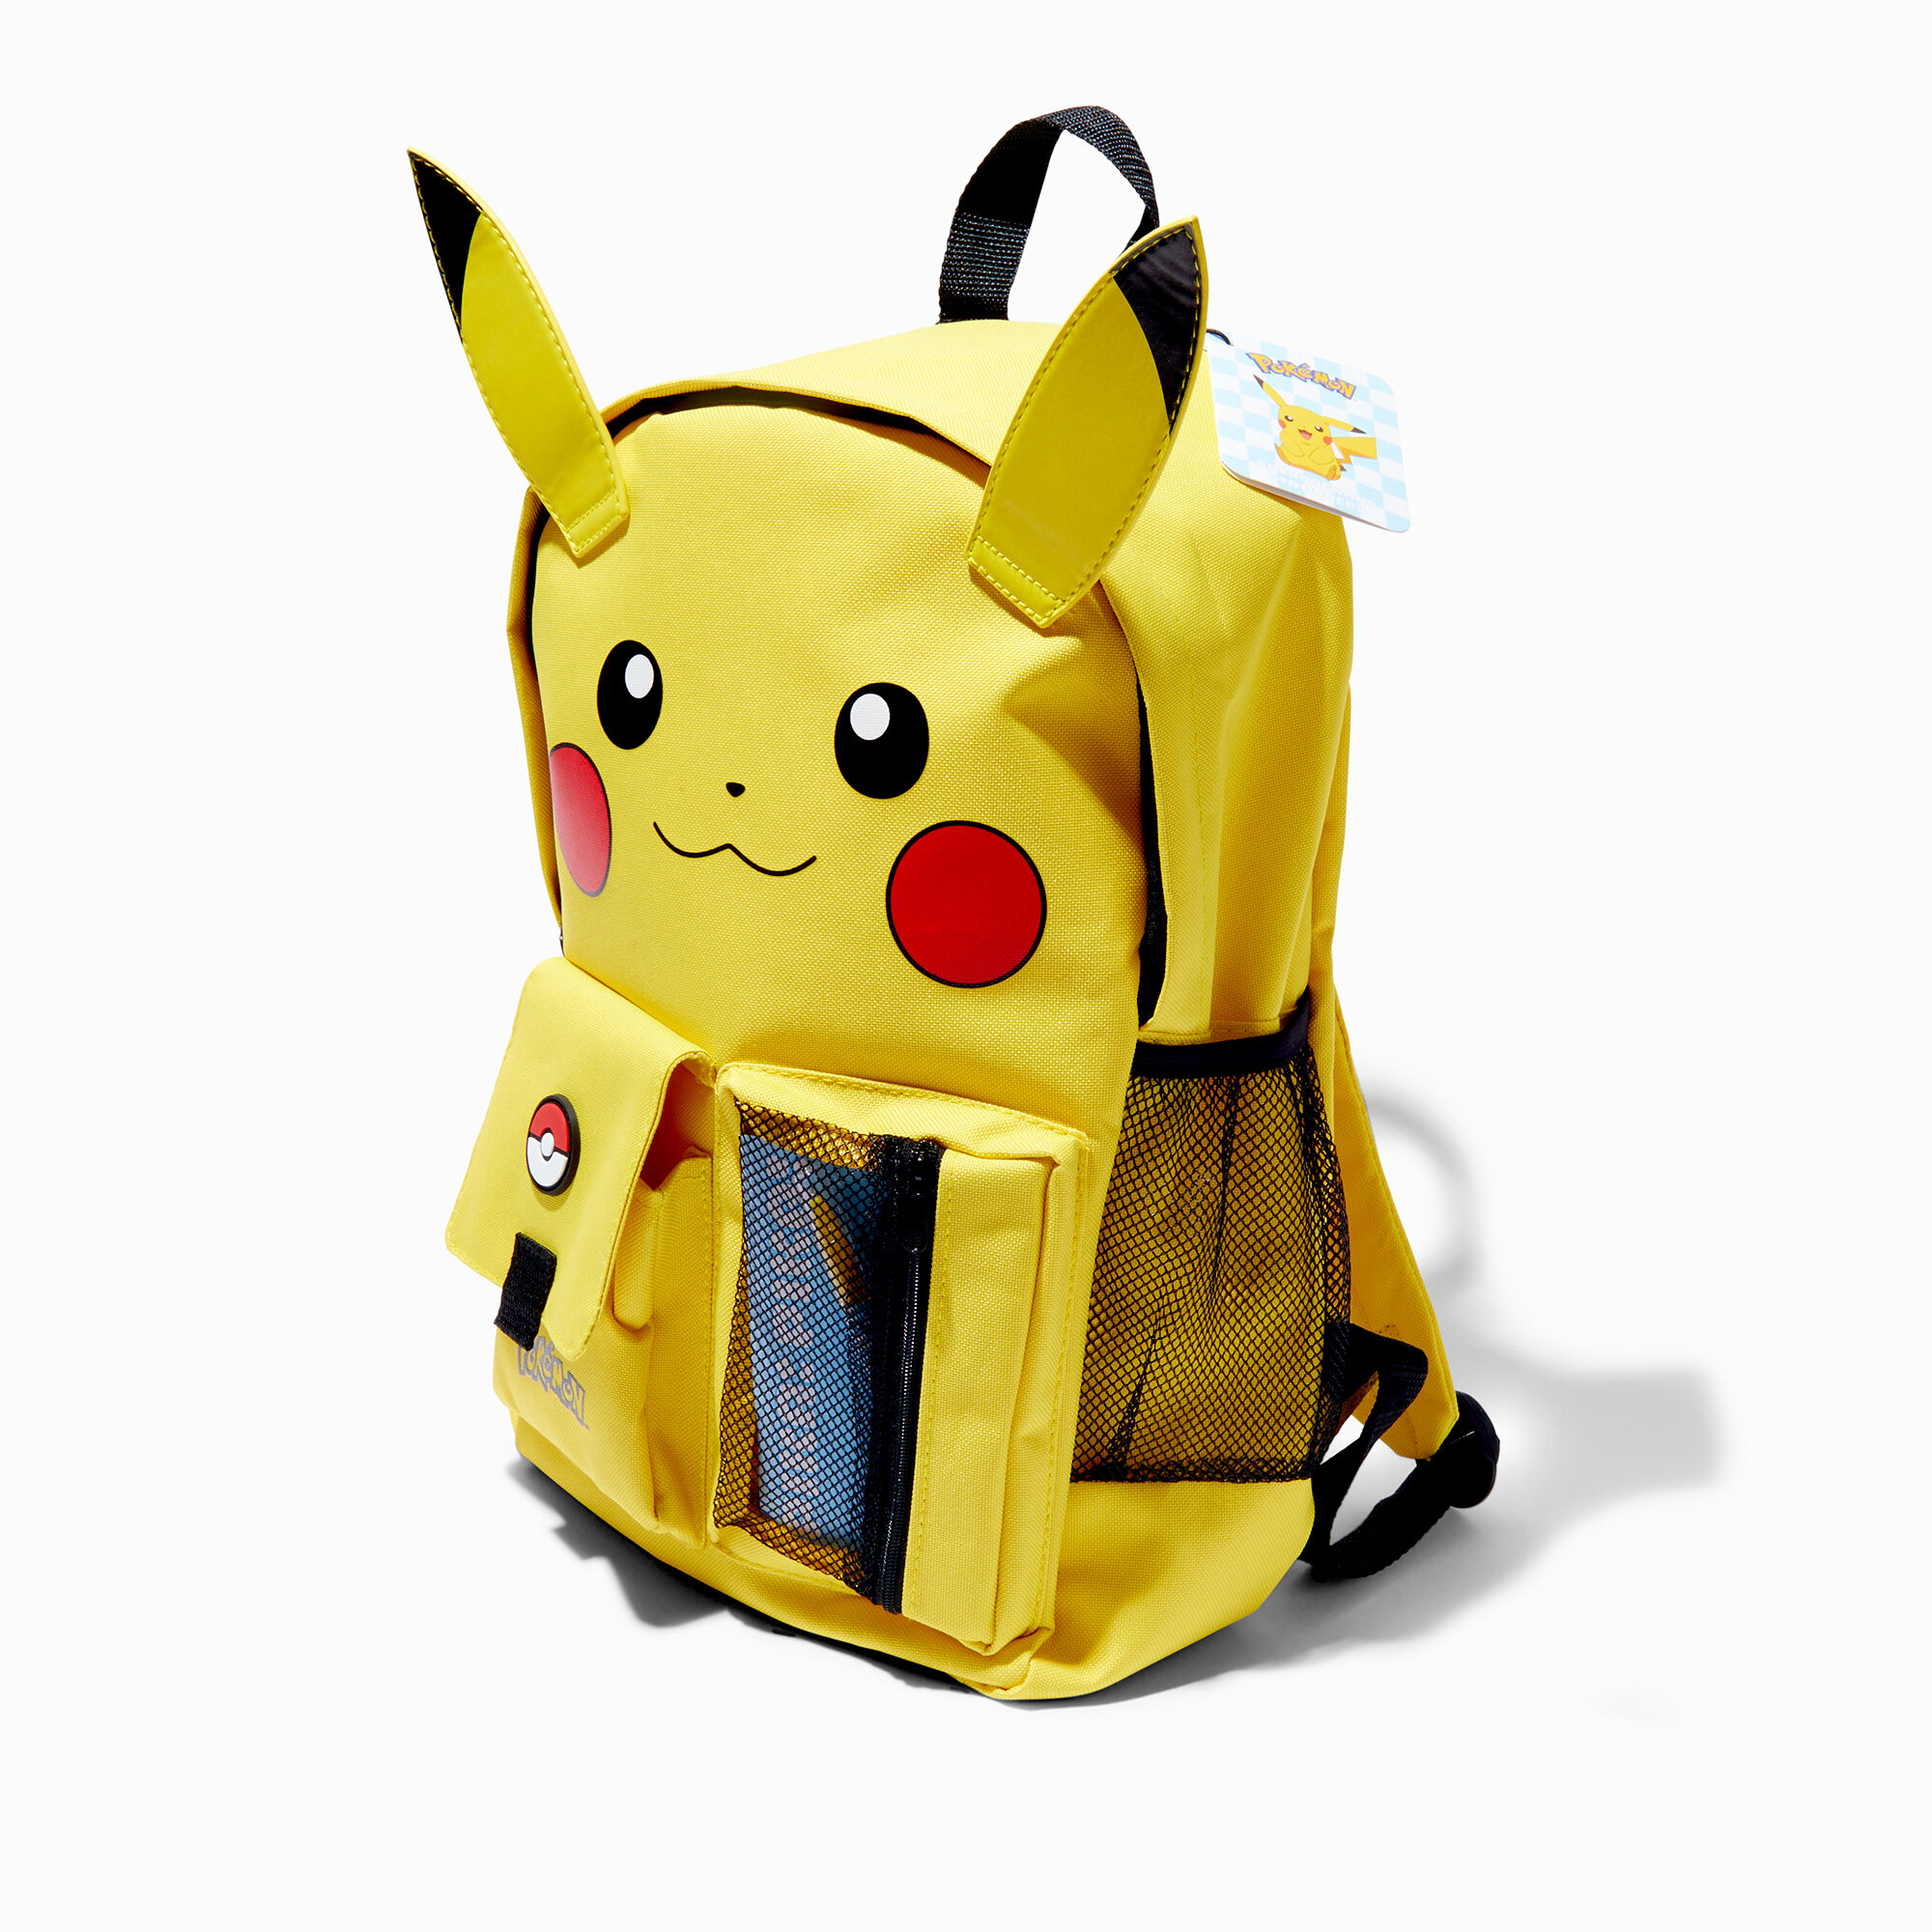 View Claires Pokémon Pikachu Backpack Yellow information